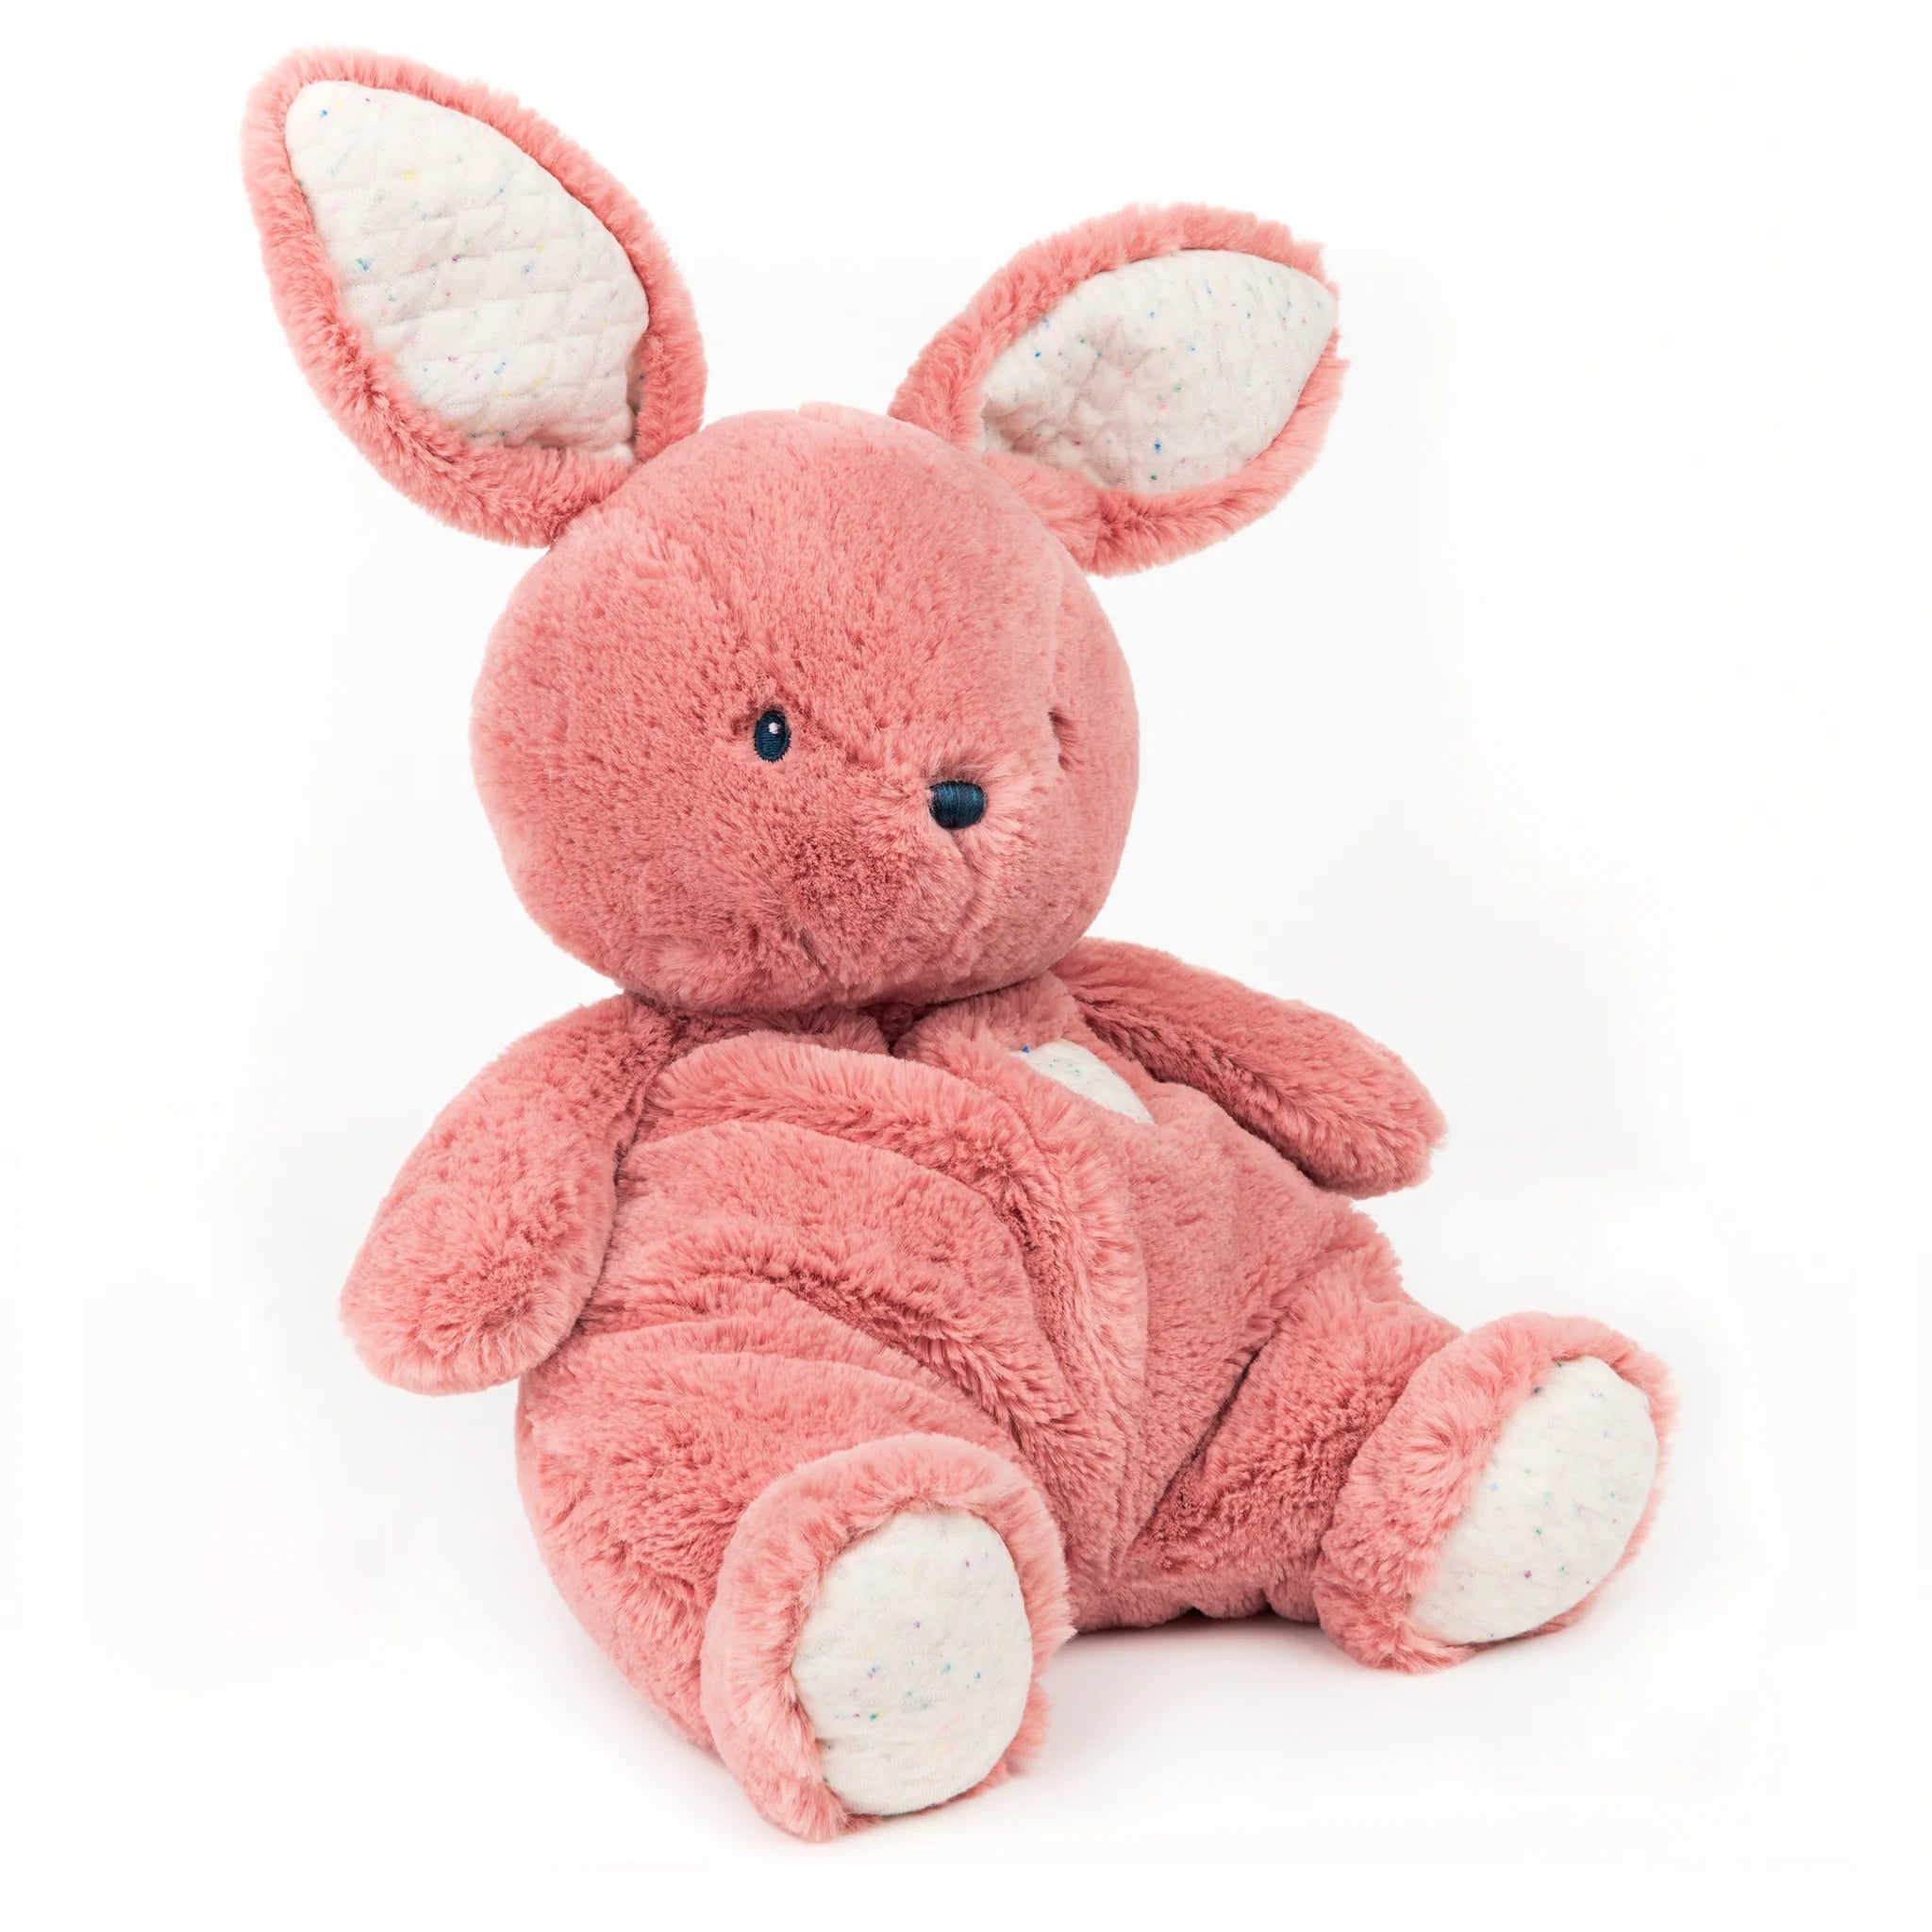 GUND Baby Sustainable Bunny Plush, Stuffed Animal Made from Recycled  Materials, for Babies and Newborns, Pink/Cream, 13”